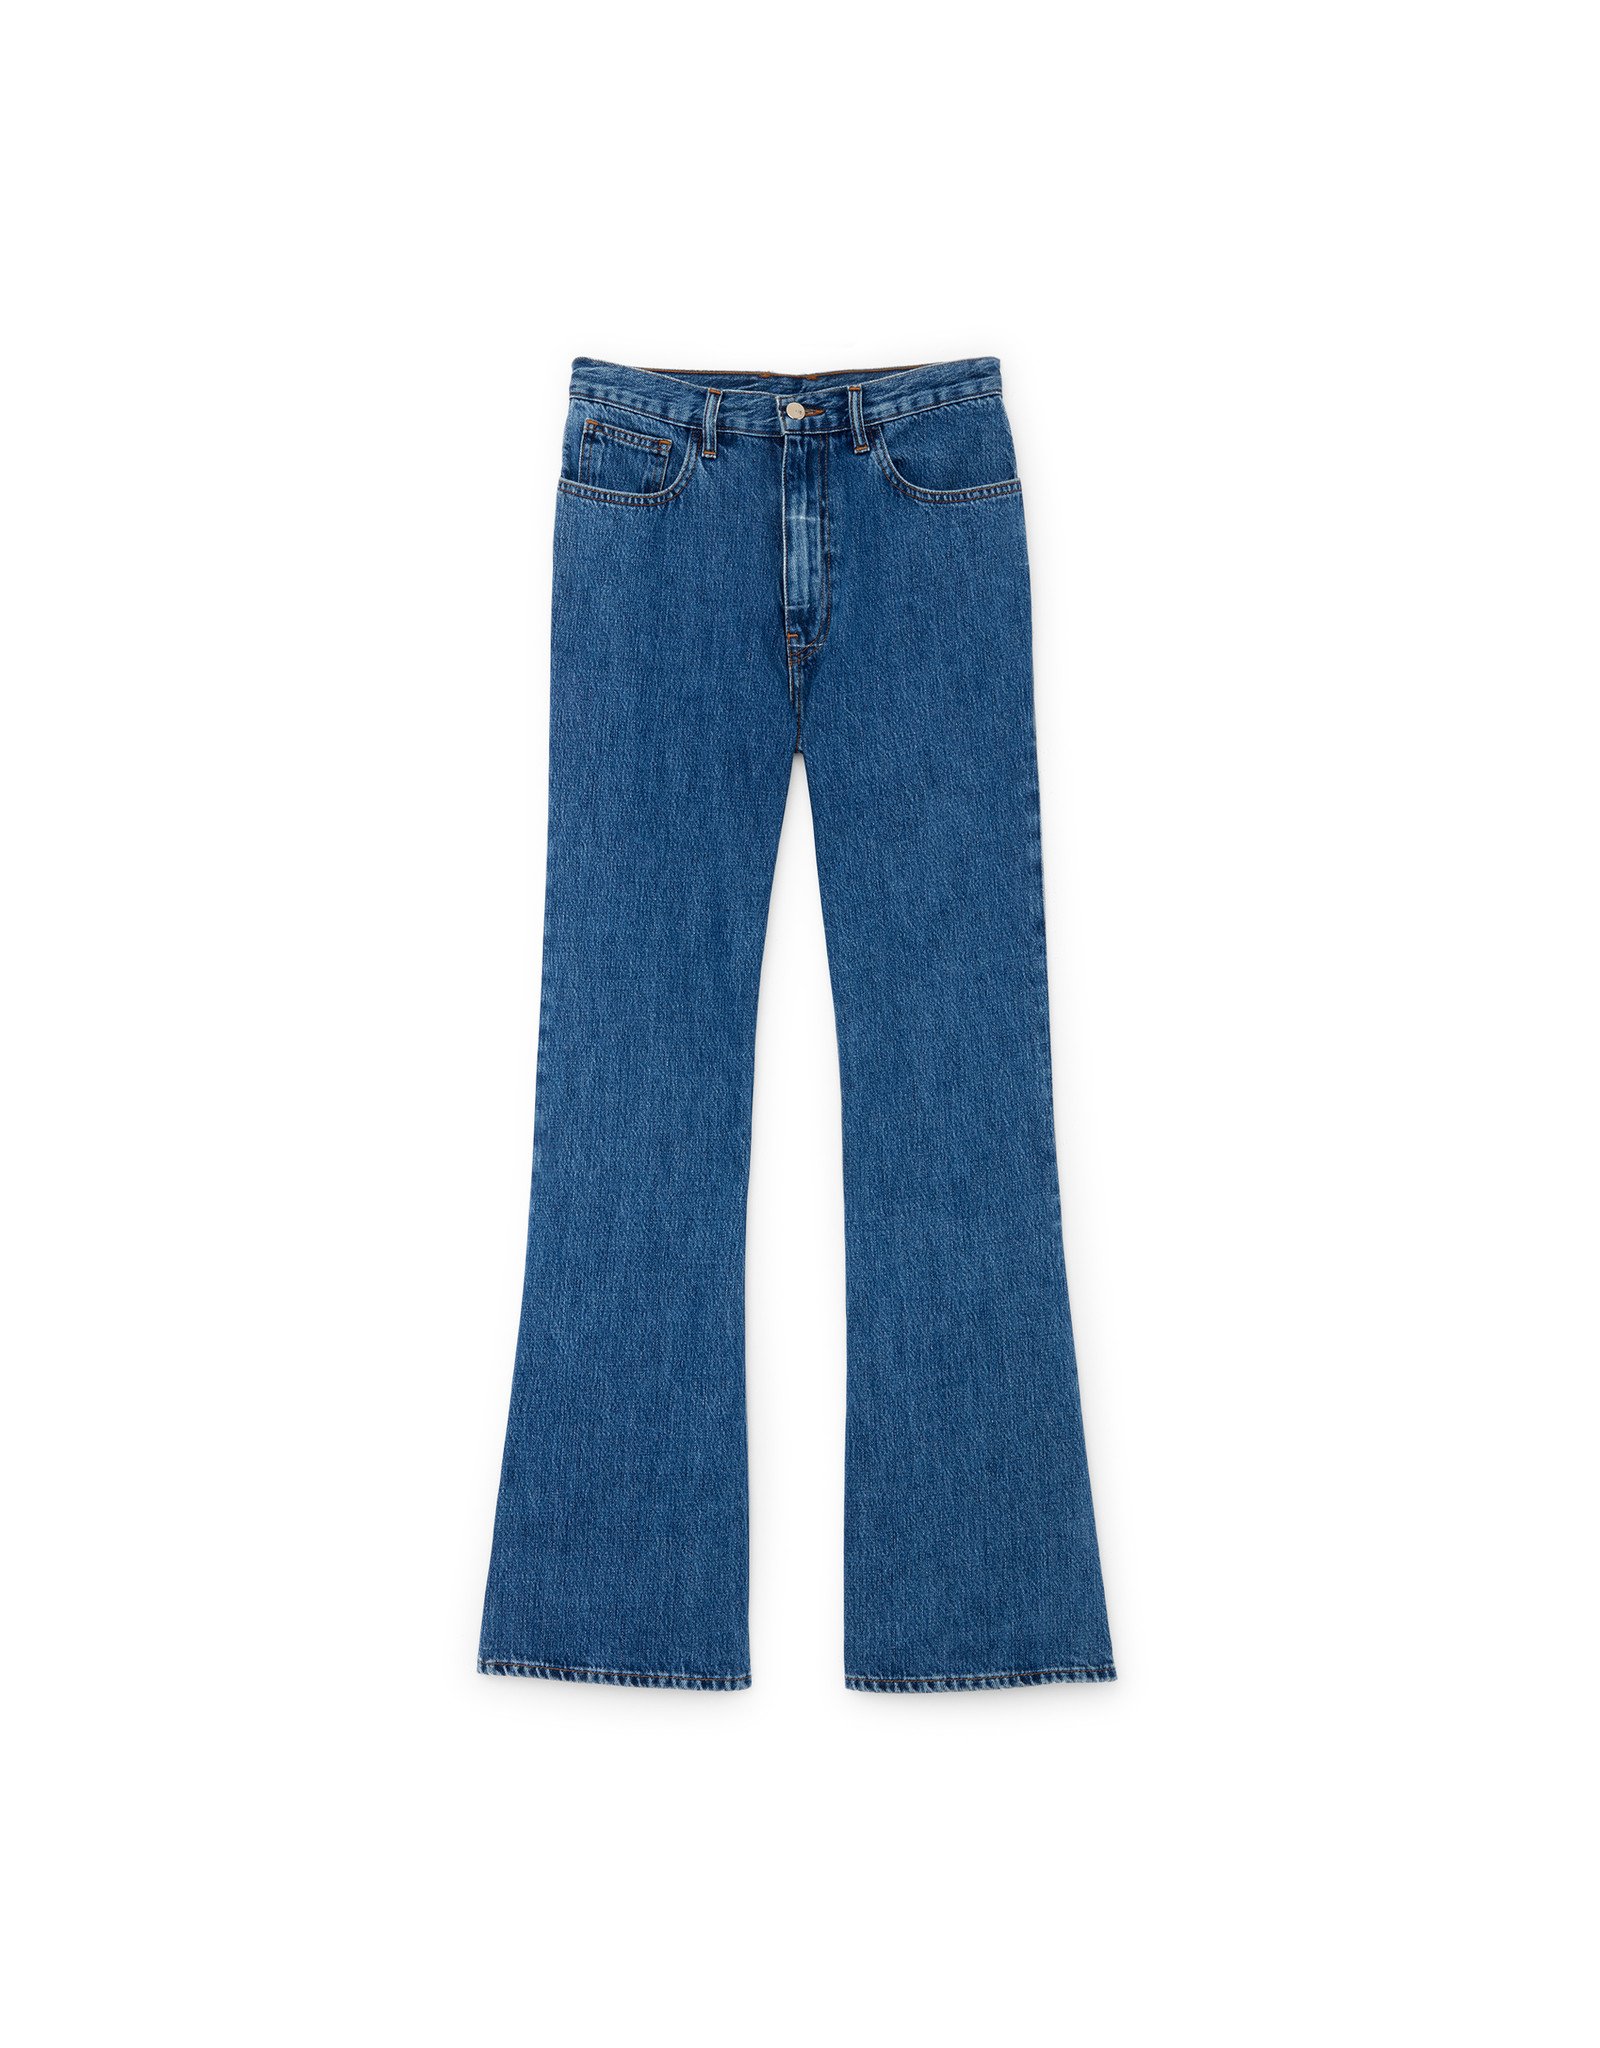 size 26 bootcut jeans